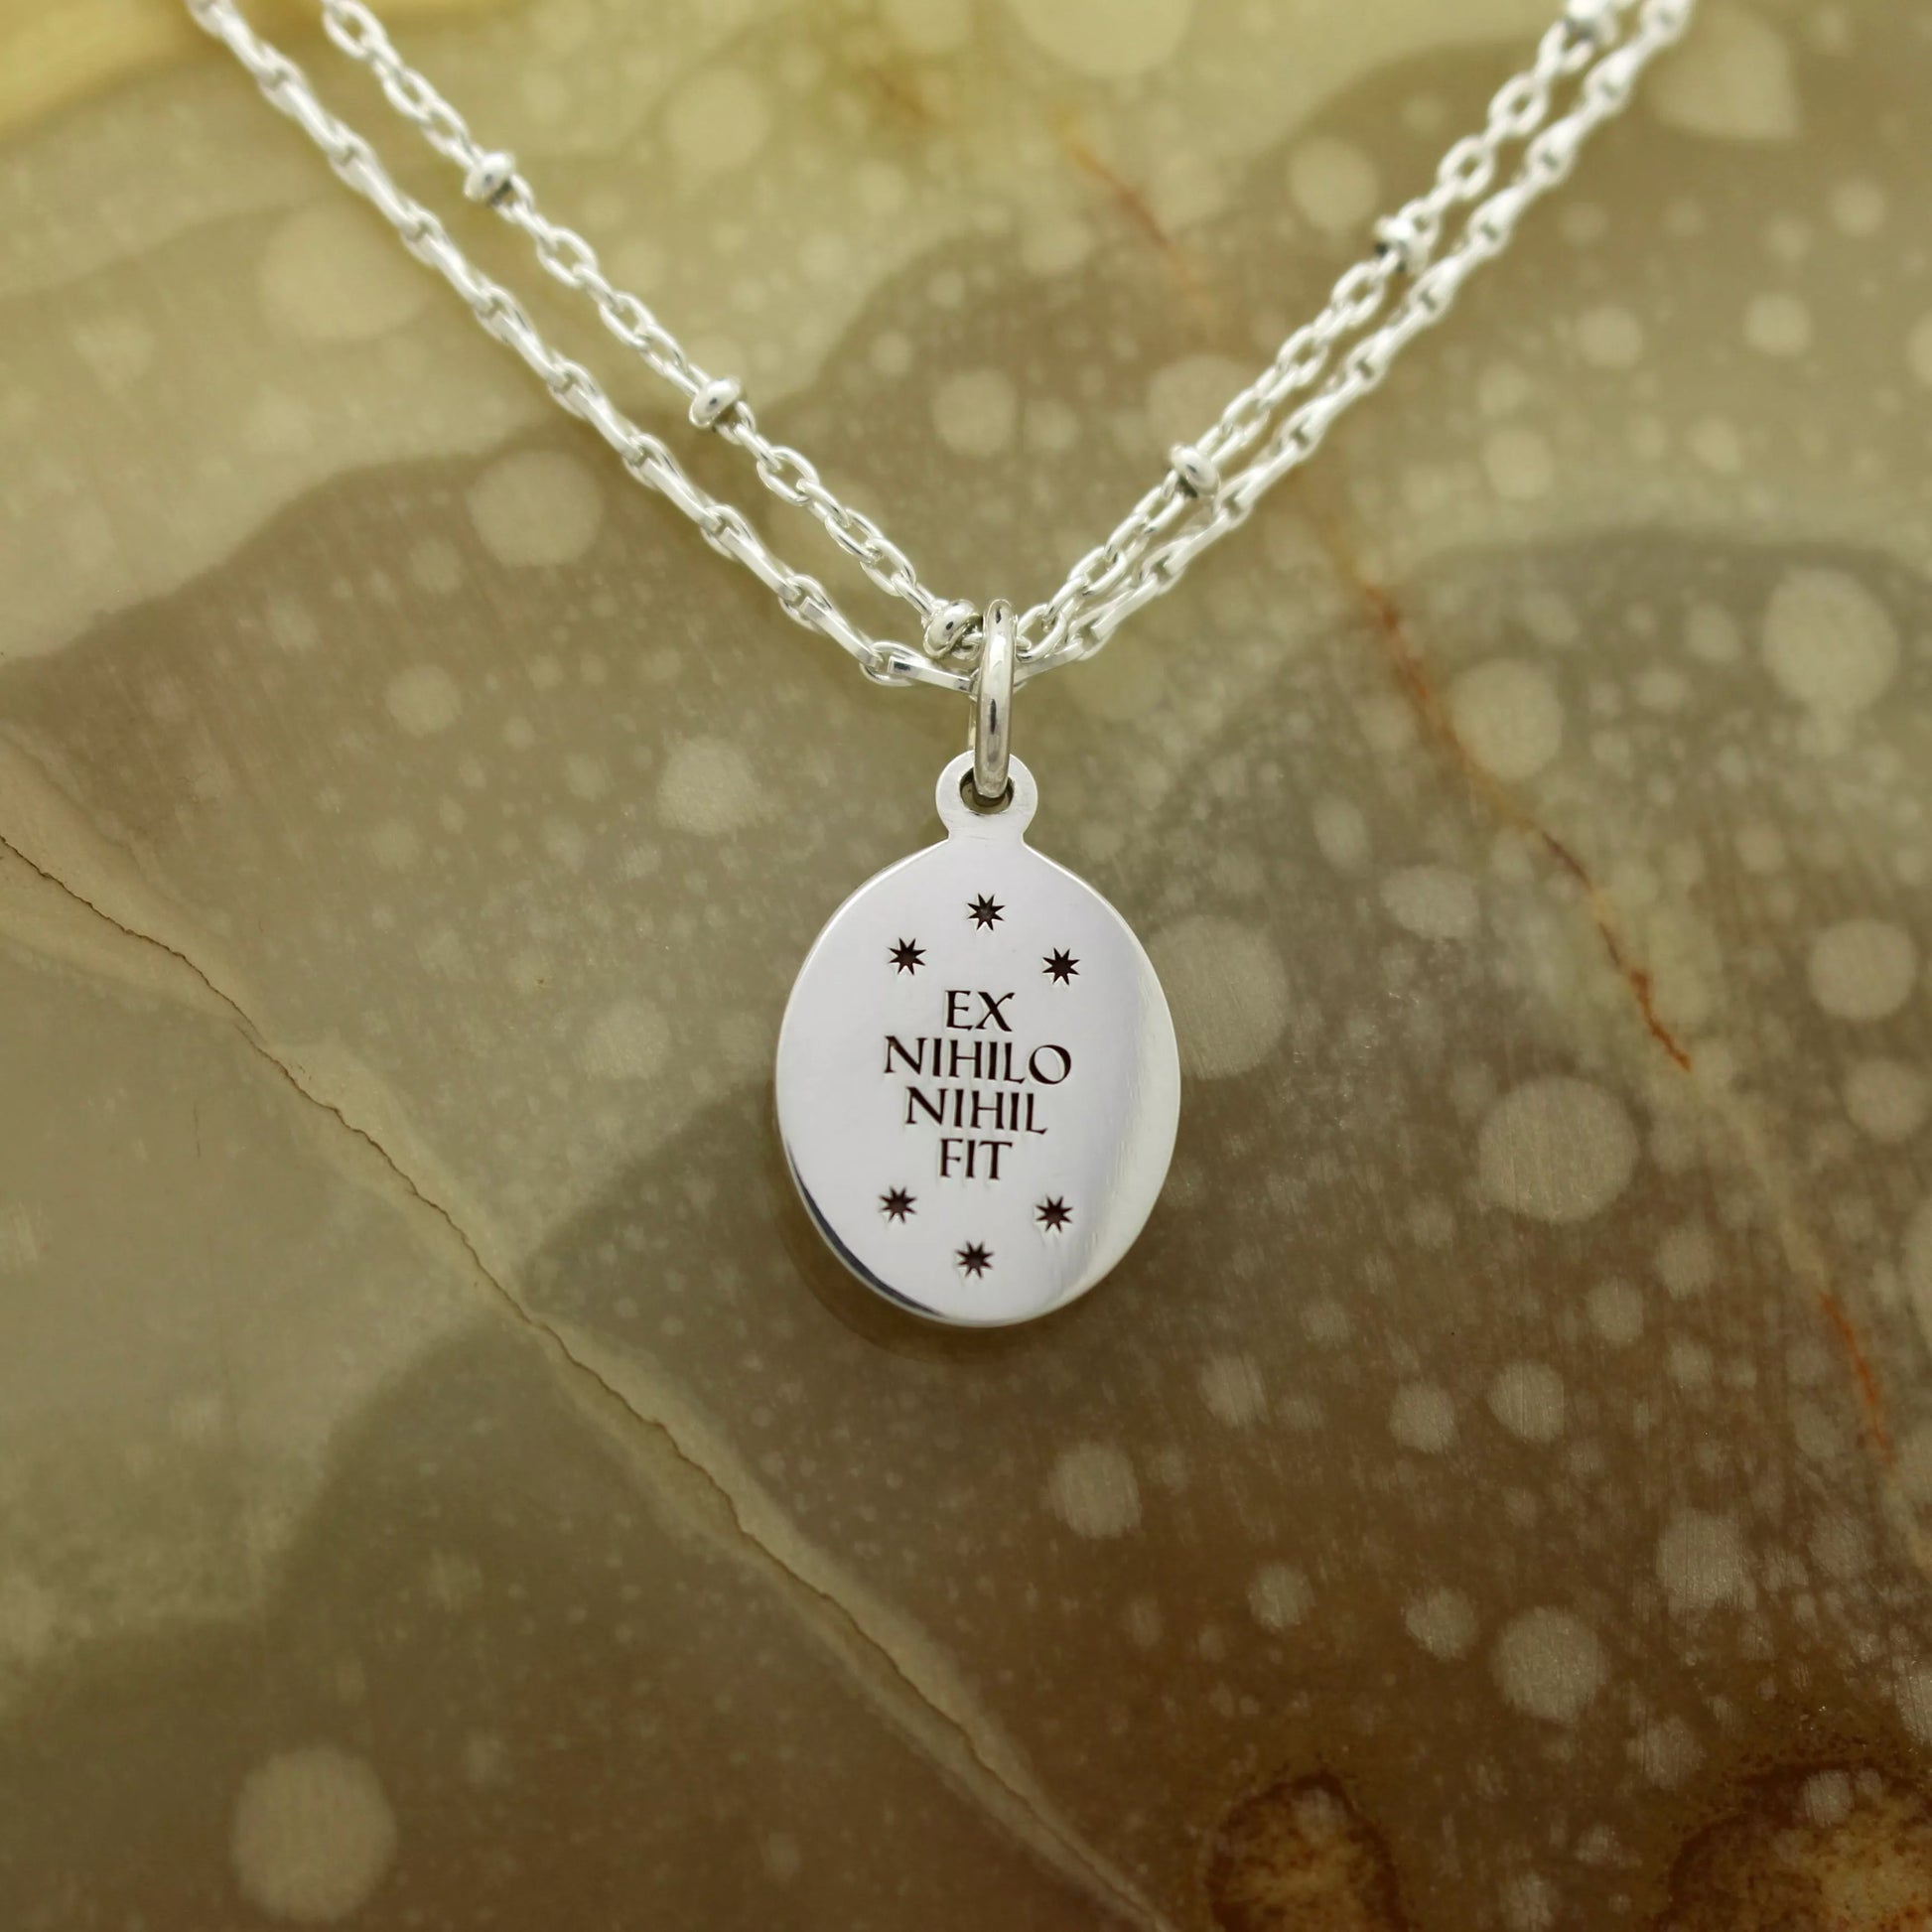 Ready To Ship -  Book Necklace with Secret Latin Message 'Nothing Comes From Nothing' (Silver), Necklace, Necklaces, The Serpents Club